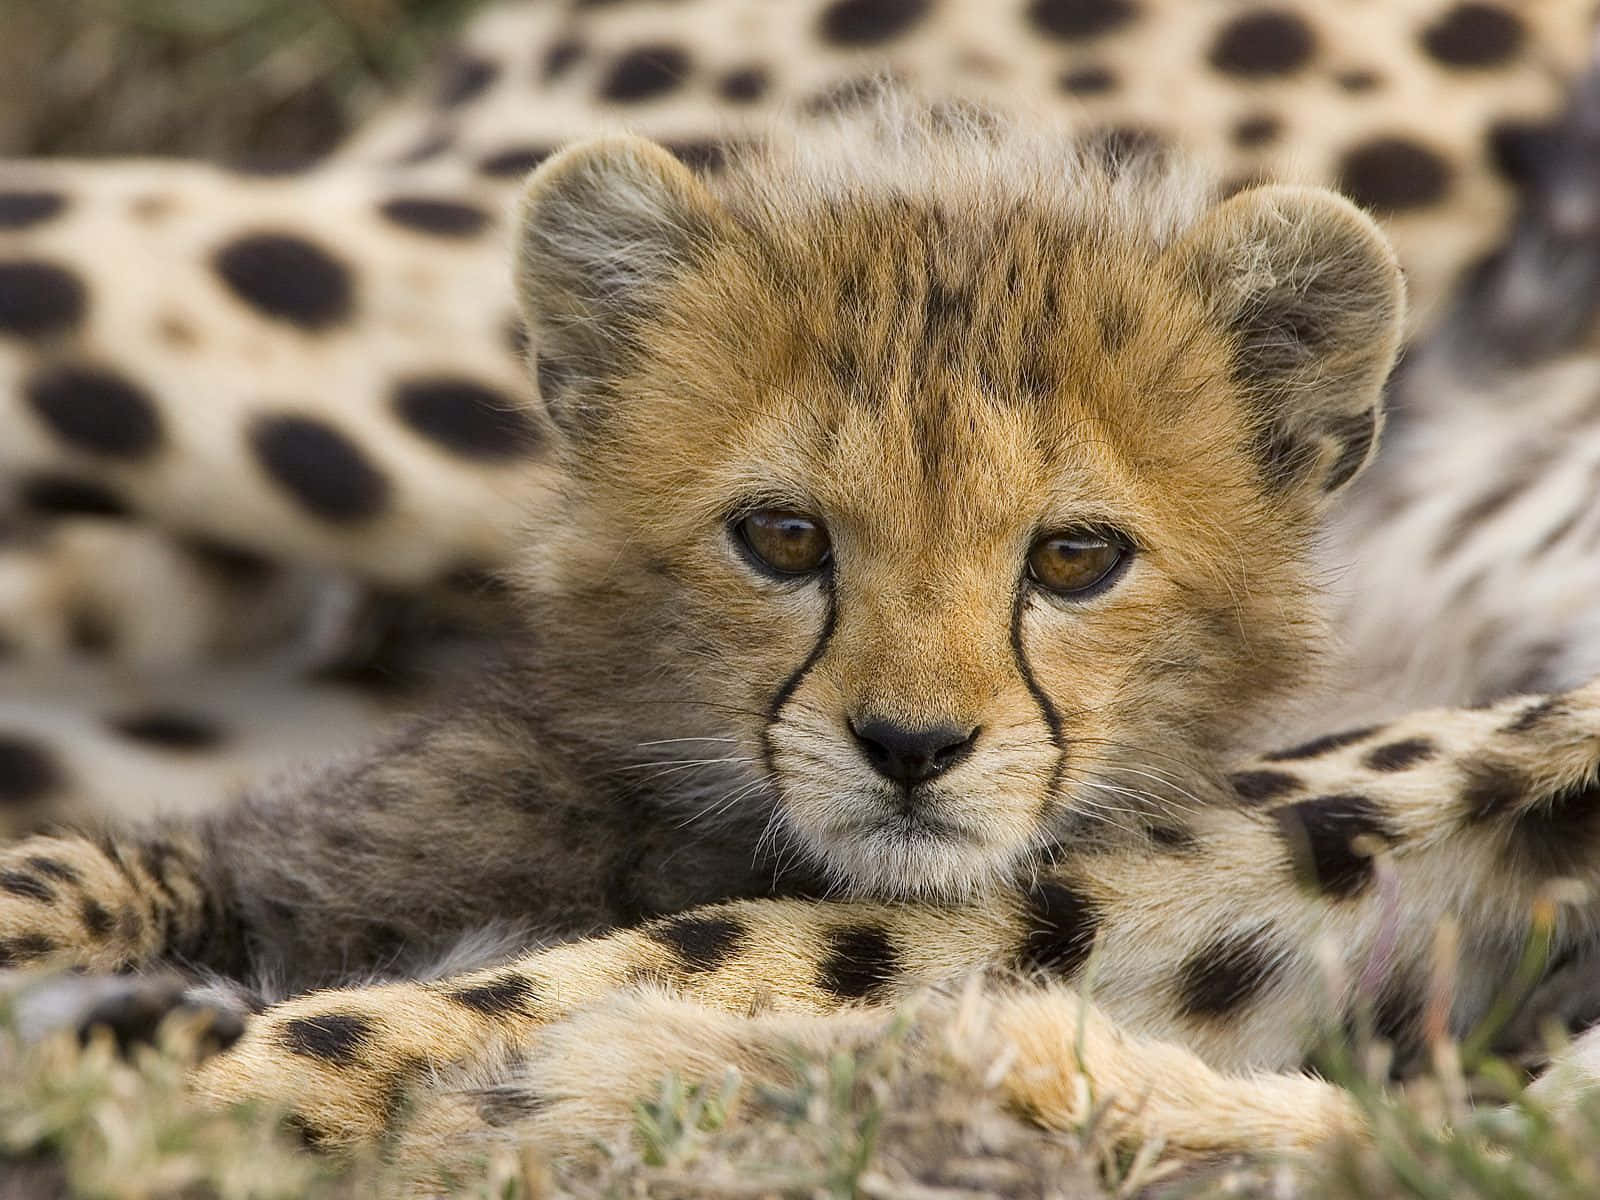 A cheetah poised to spring in pursuit of its prey